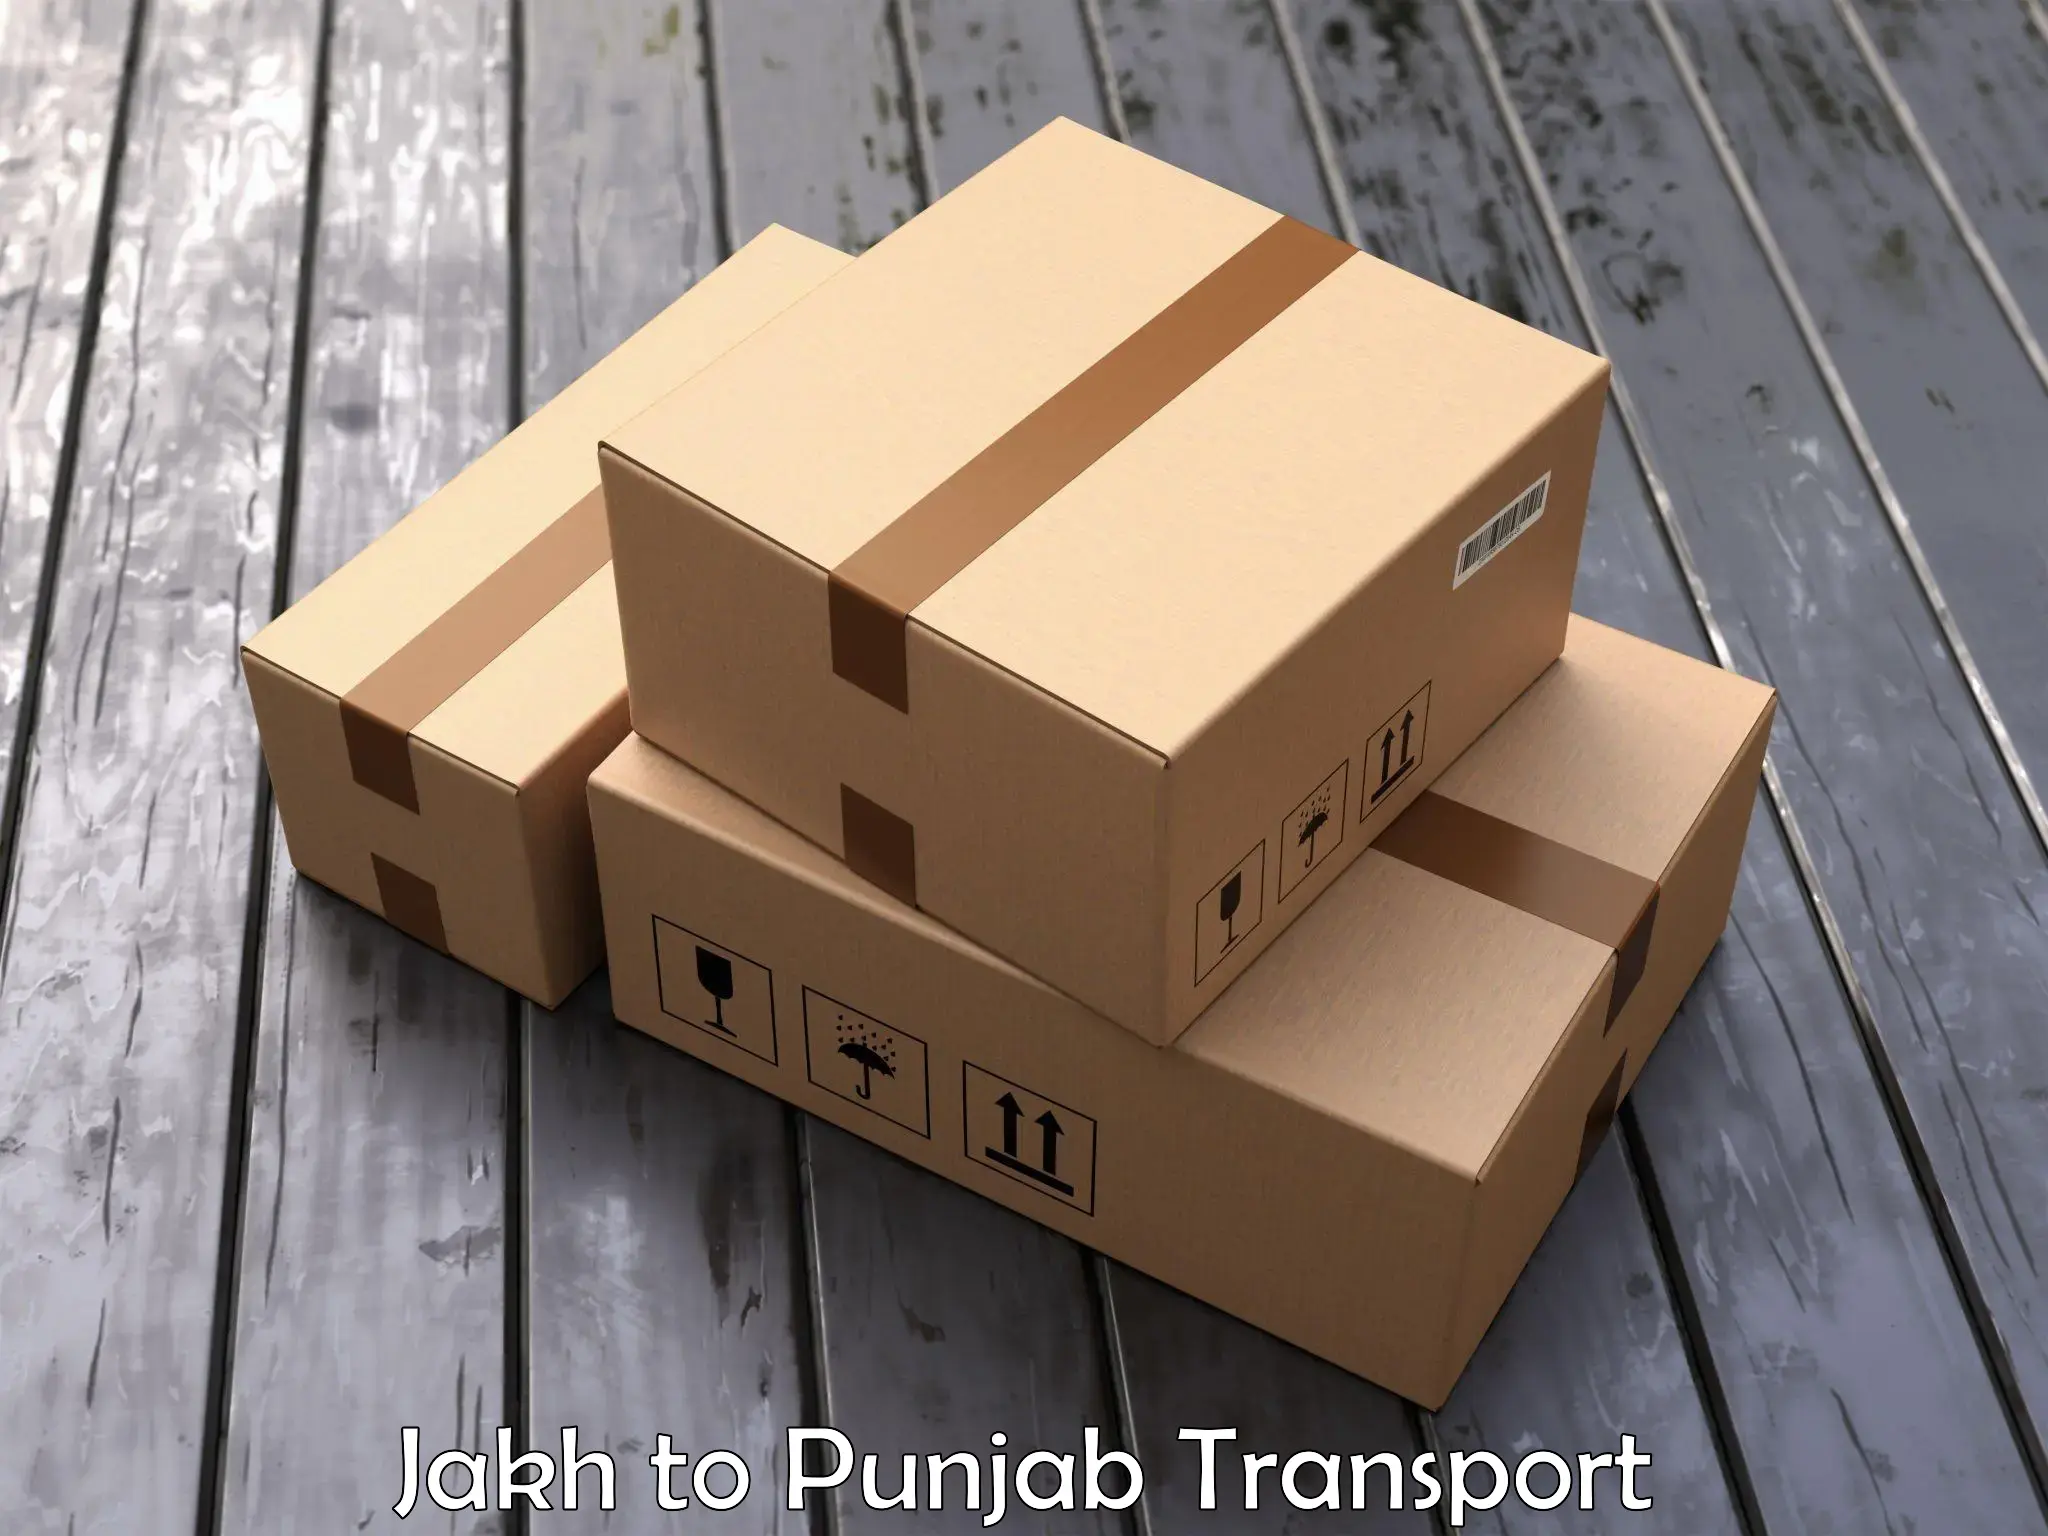 Nationwide transport services Jakh to Amritsar